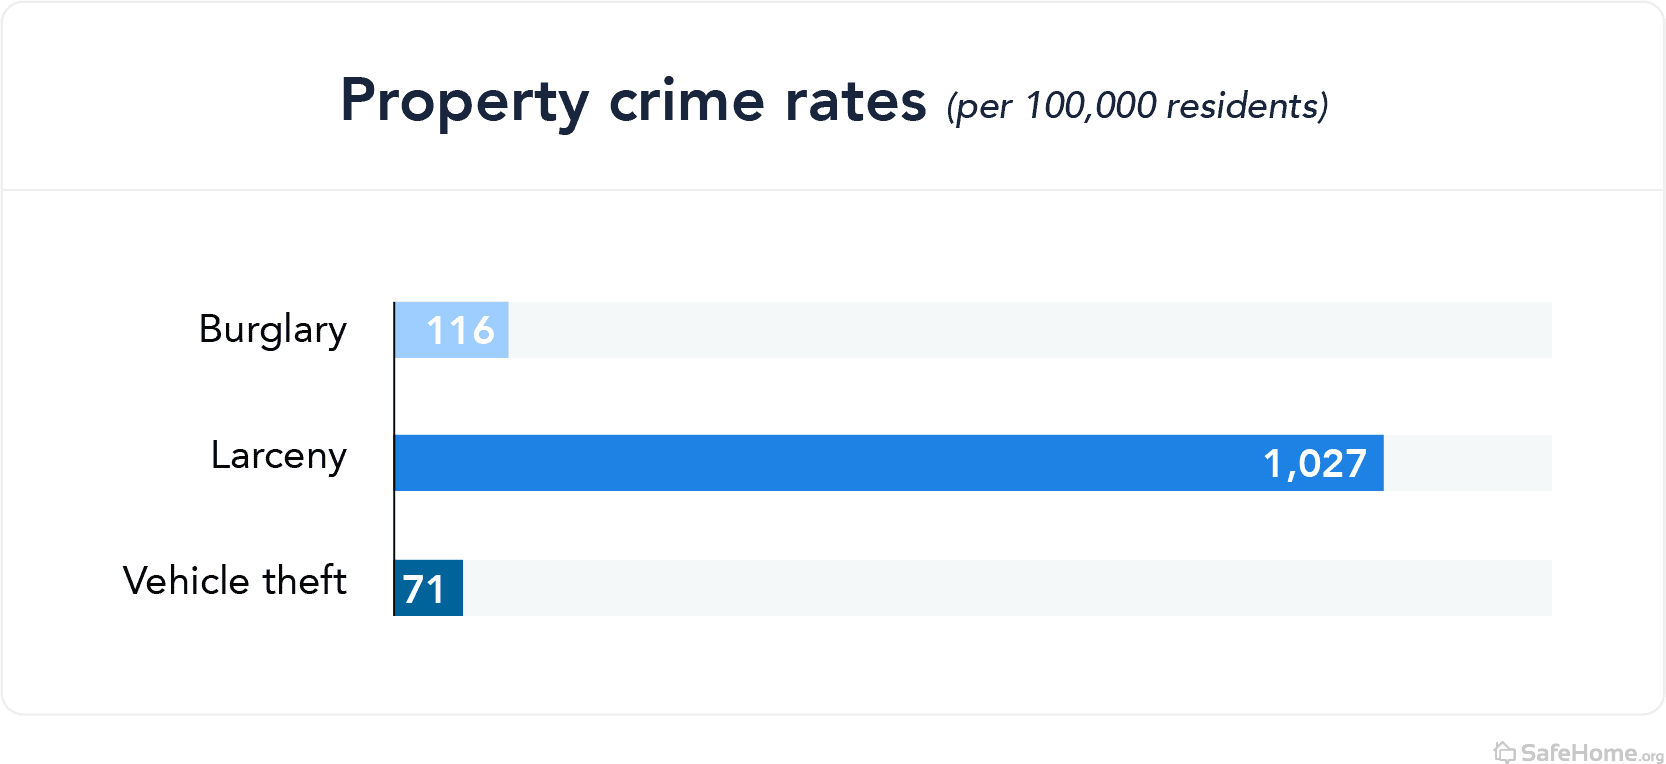 Maine property crime rates